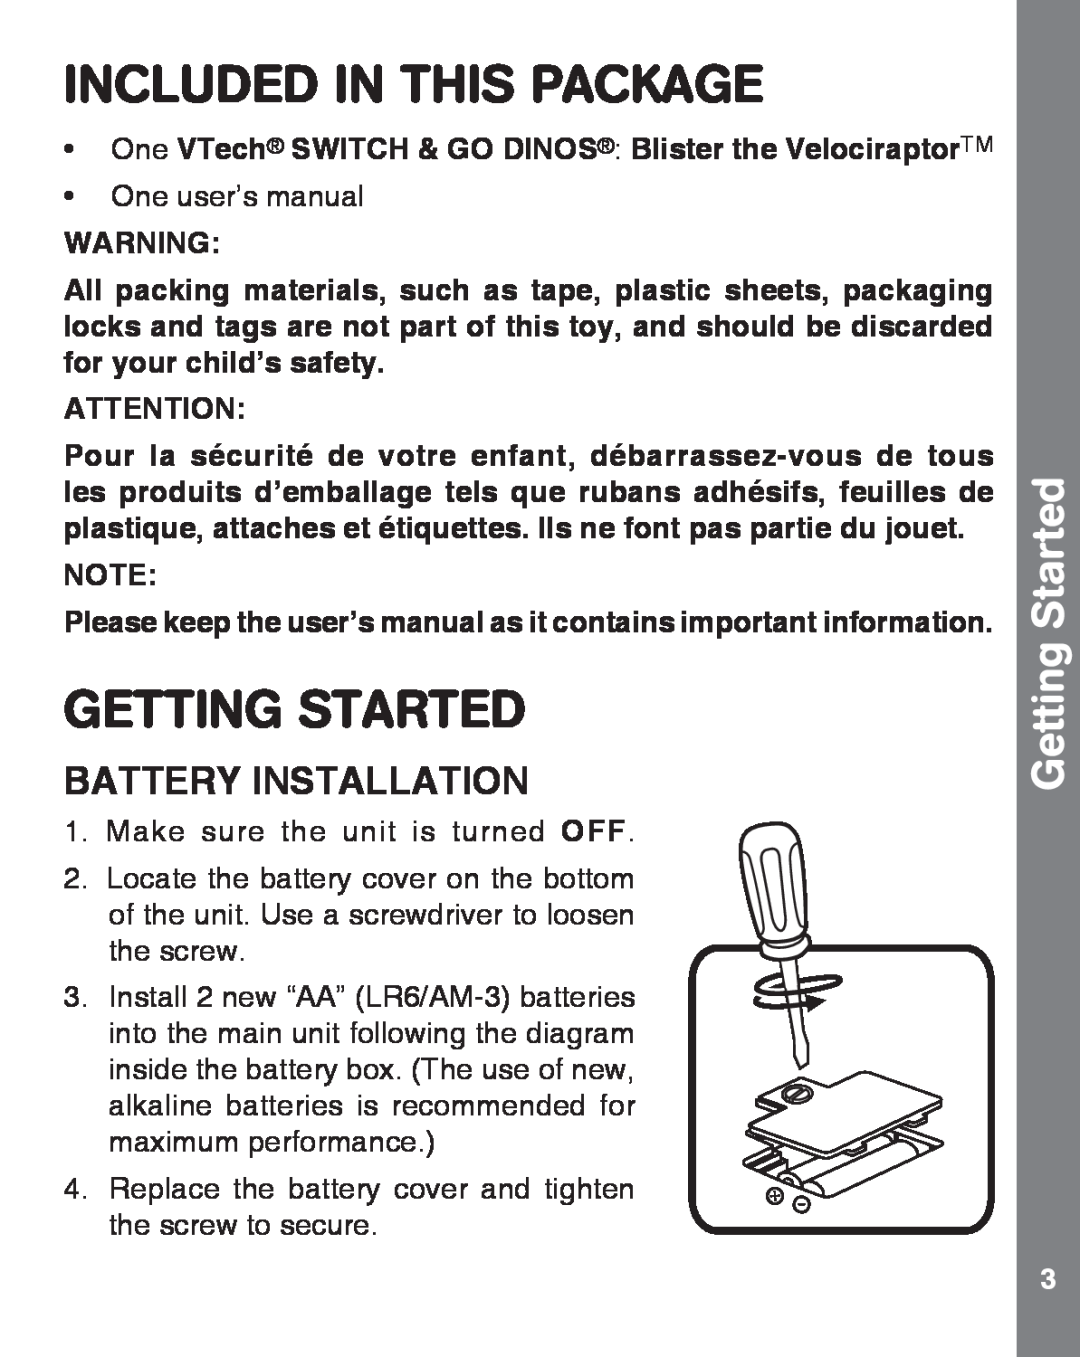 VTech 91-009642-000 user manual Included In This Package, Getting Started, Battery Installation 